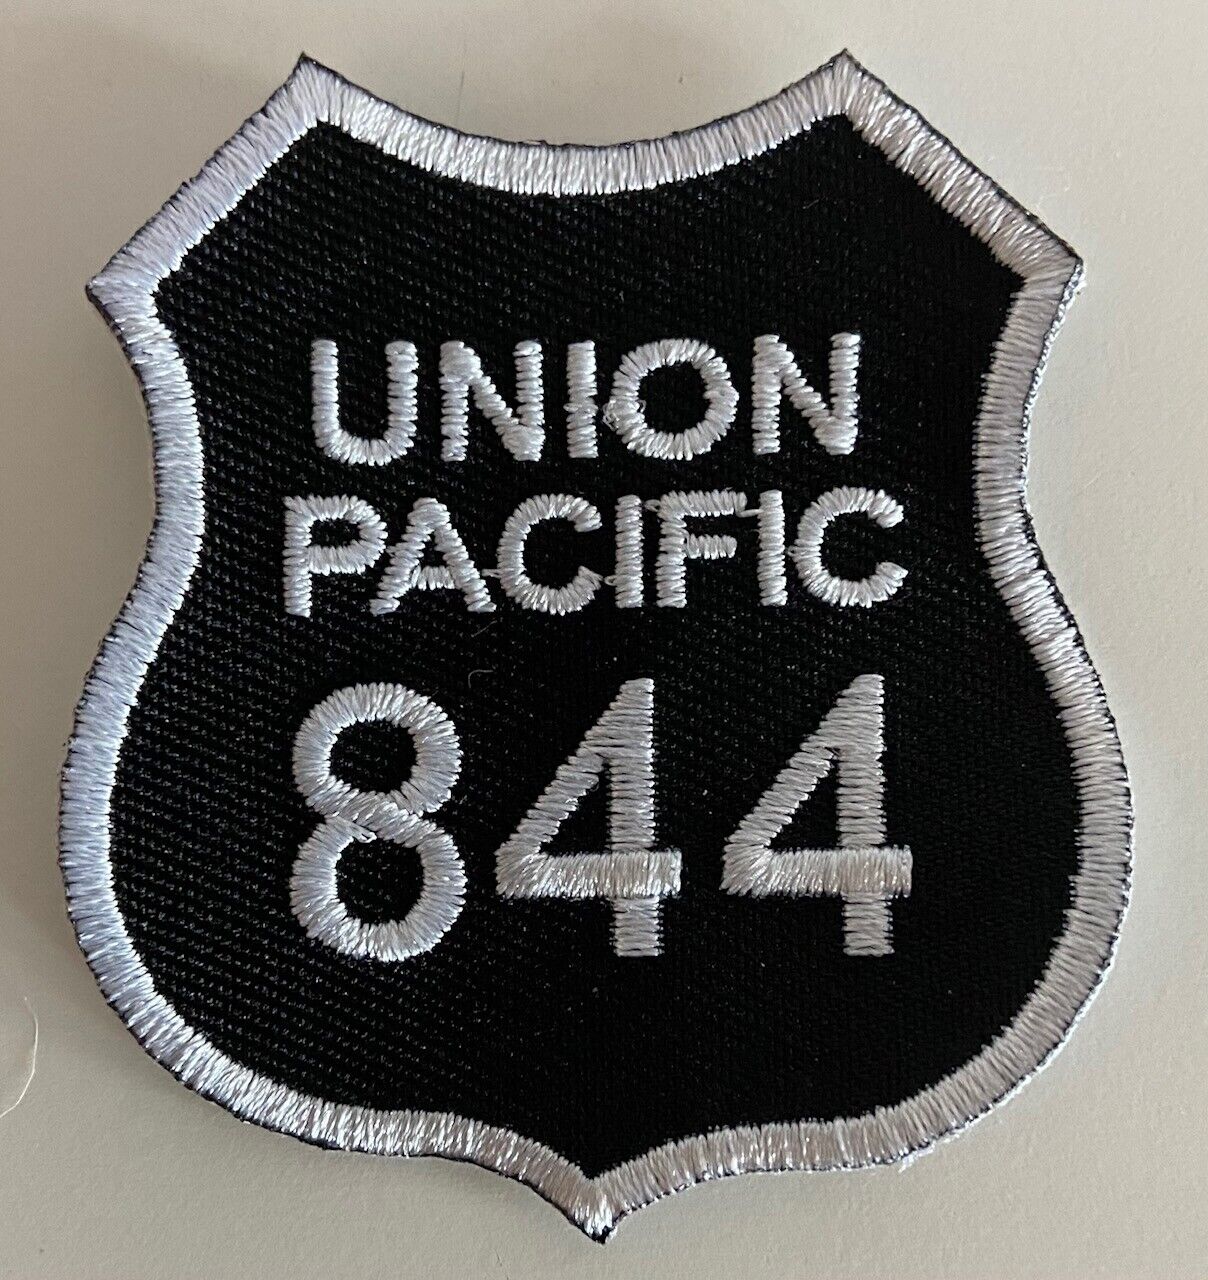 Patch- 844 Steam Locomotive- UNION PACIFIC - (UP) #22376 - NEW 